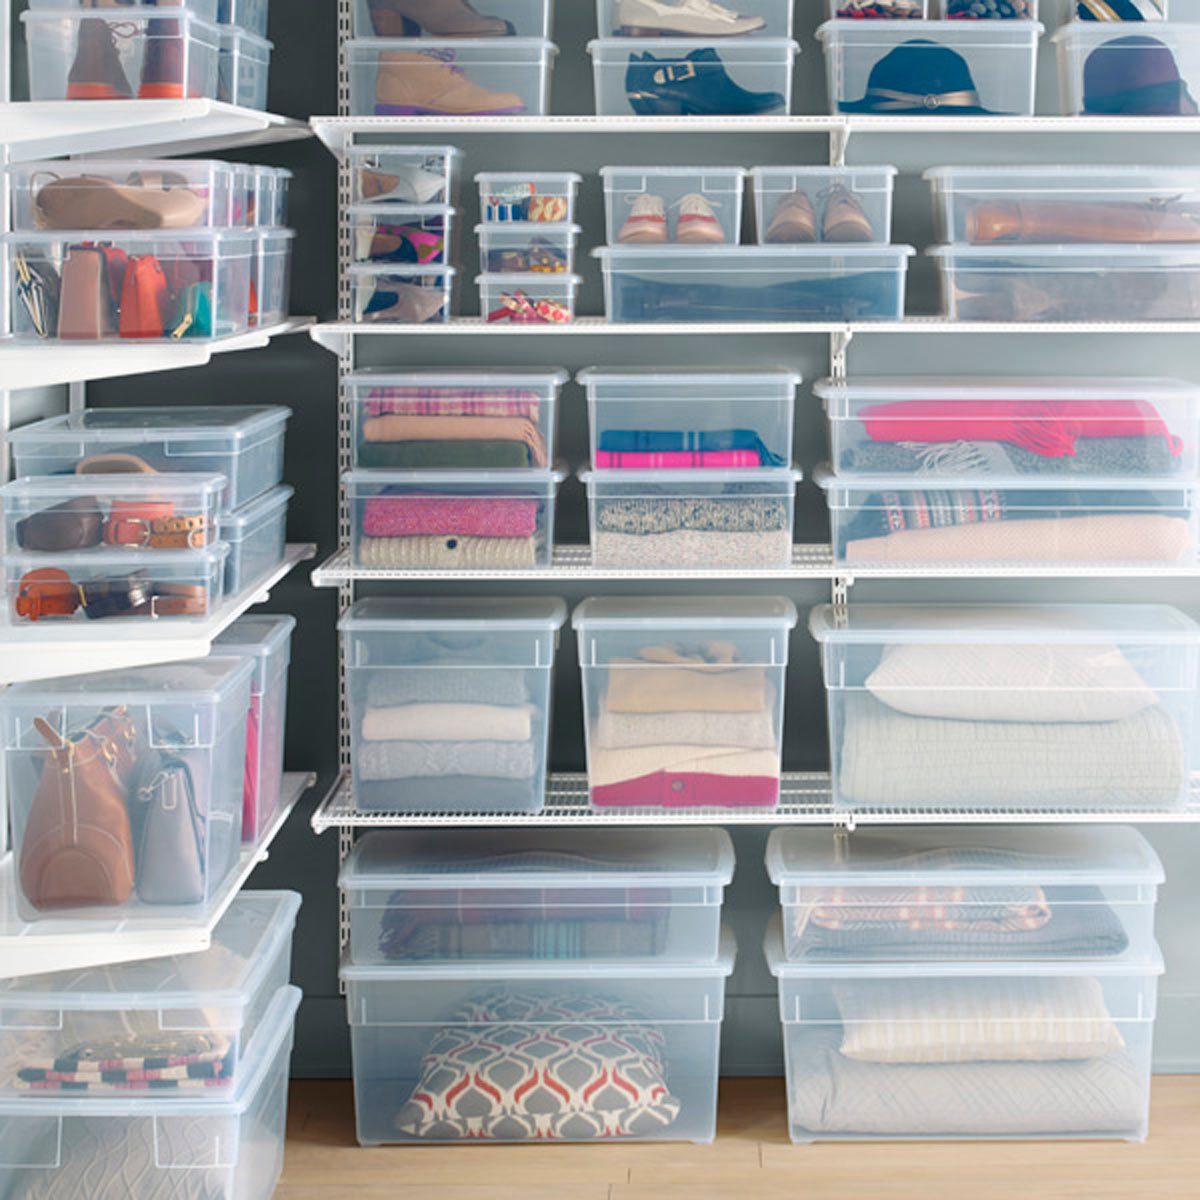 Clear bins make it super easy to organize the contents of your